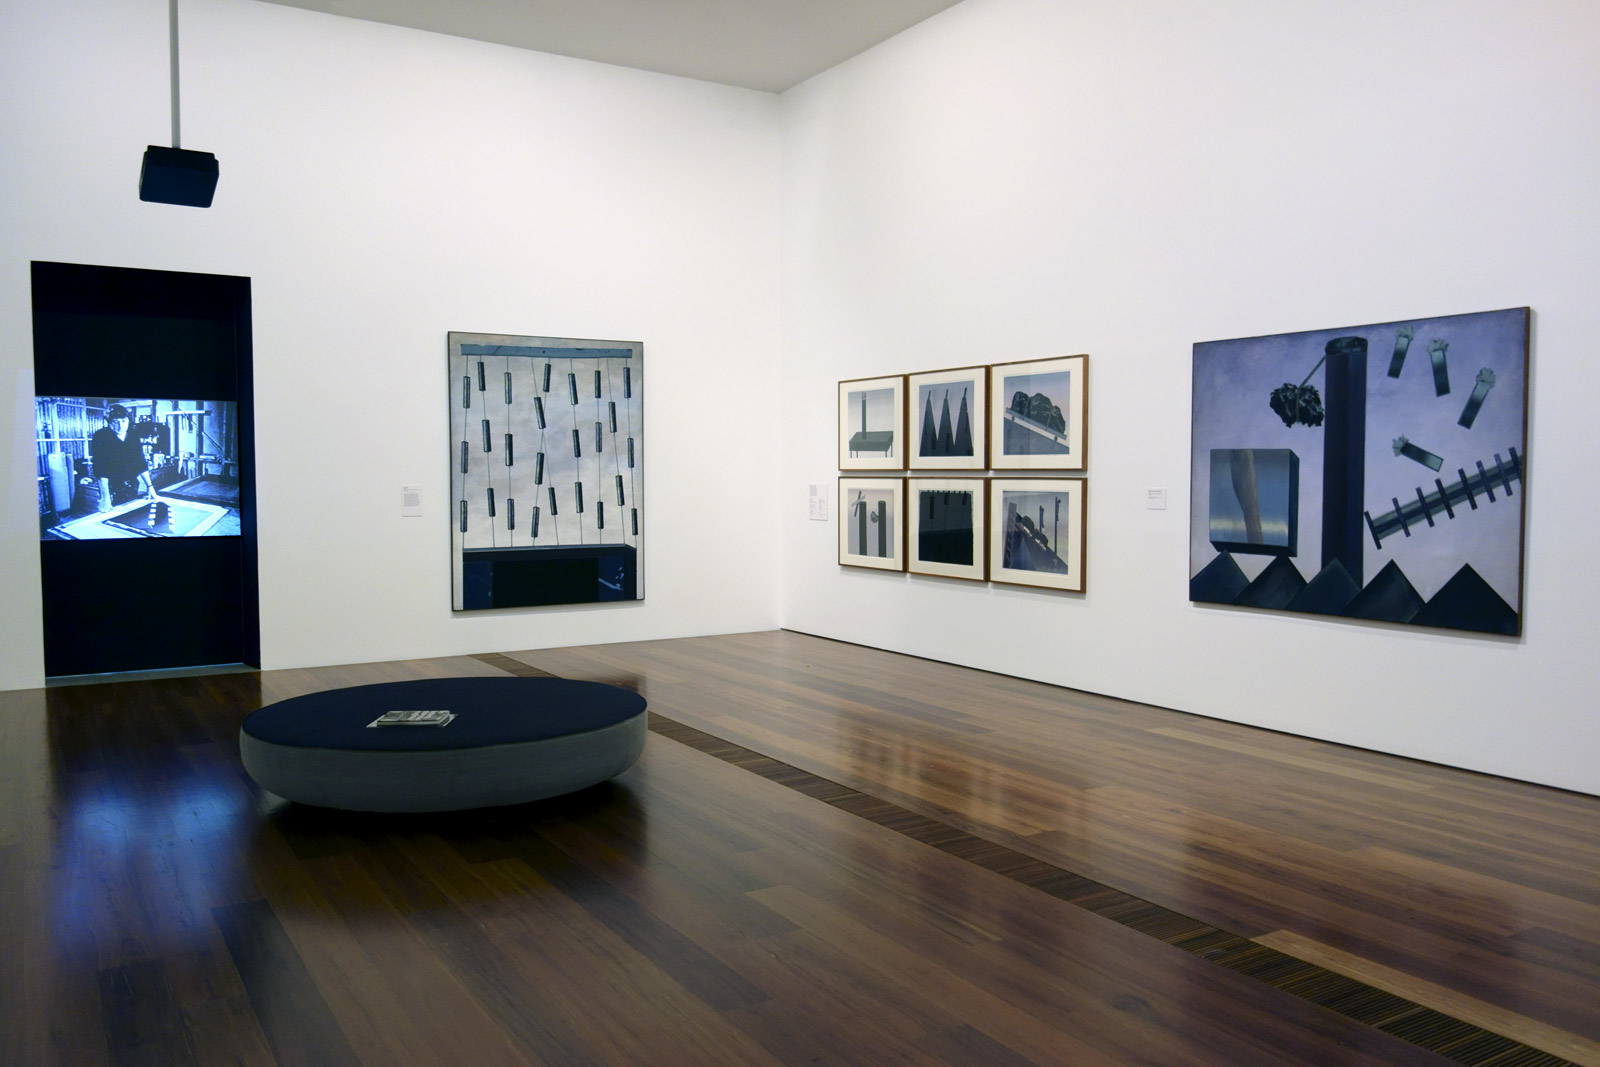 Installation view of the exhibition 'Jan Senbergs: Observation - Imagination' at The Ian Potter Centre: NGV Australia showing at right, 'Column and still objects 1' (1968)